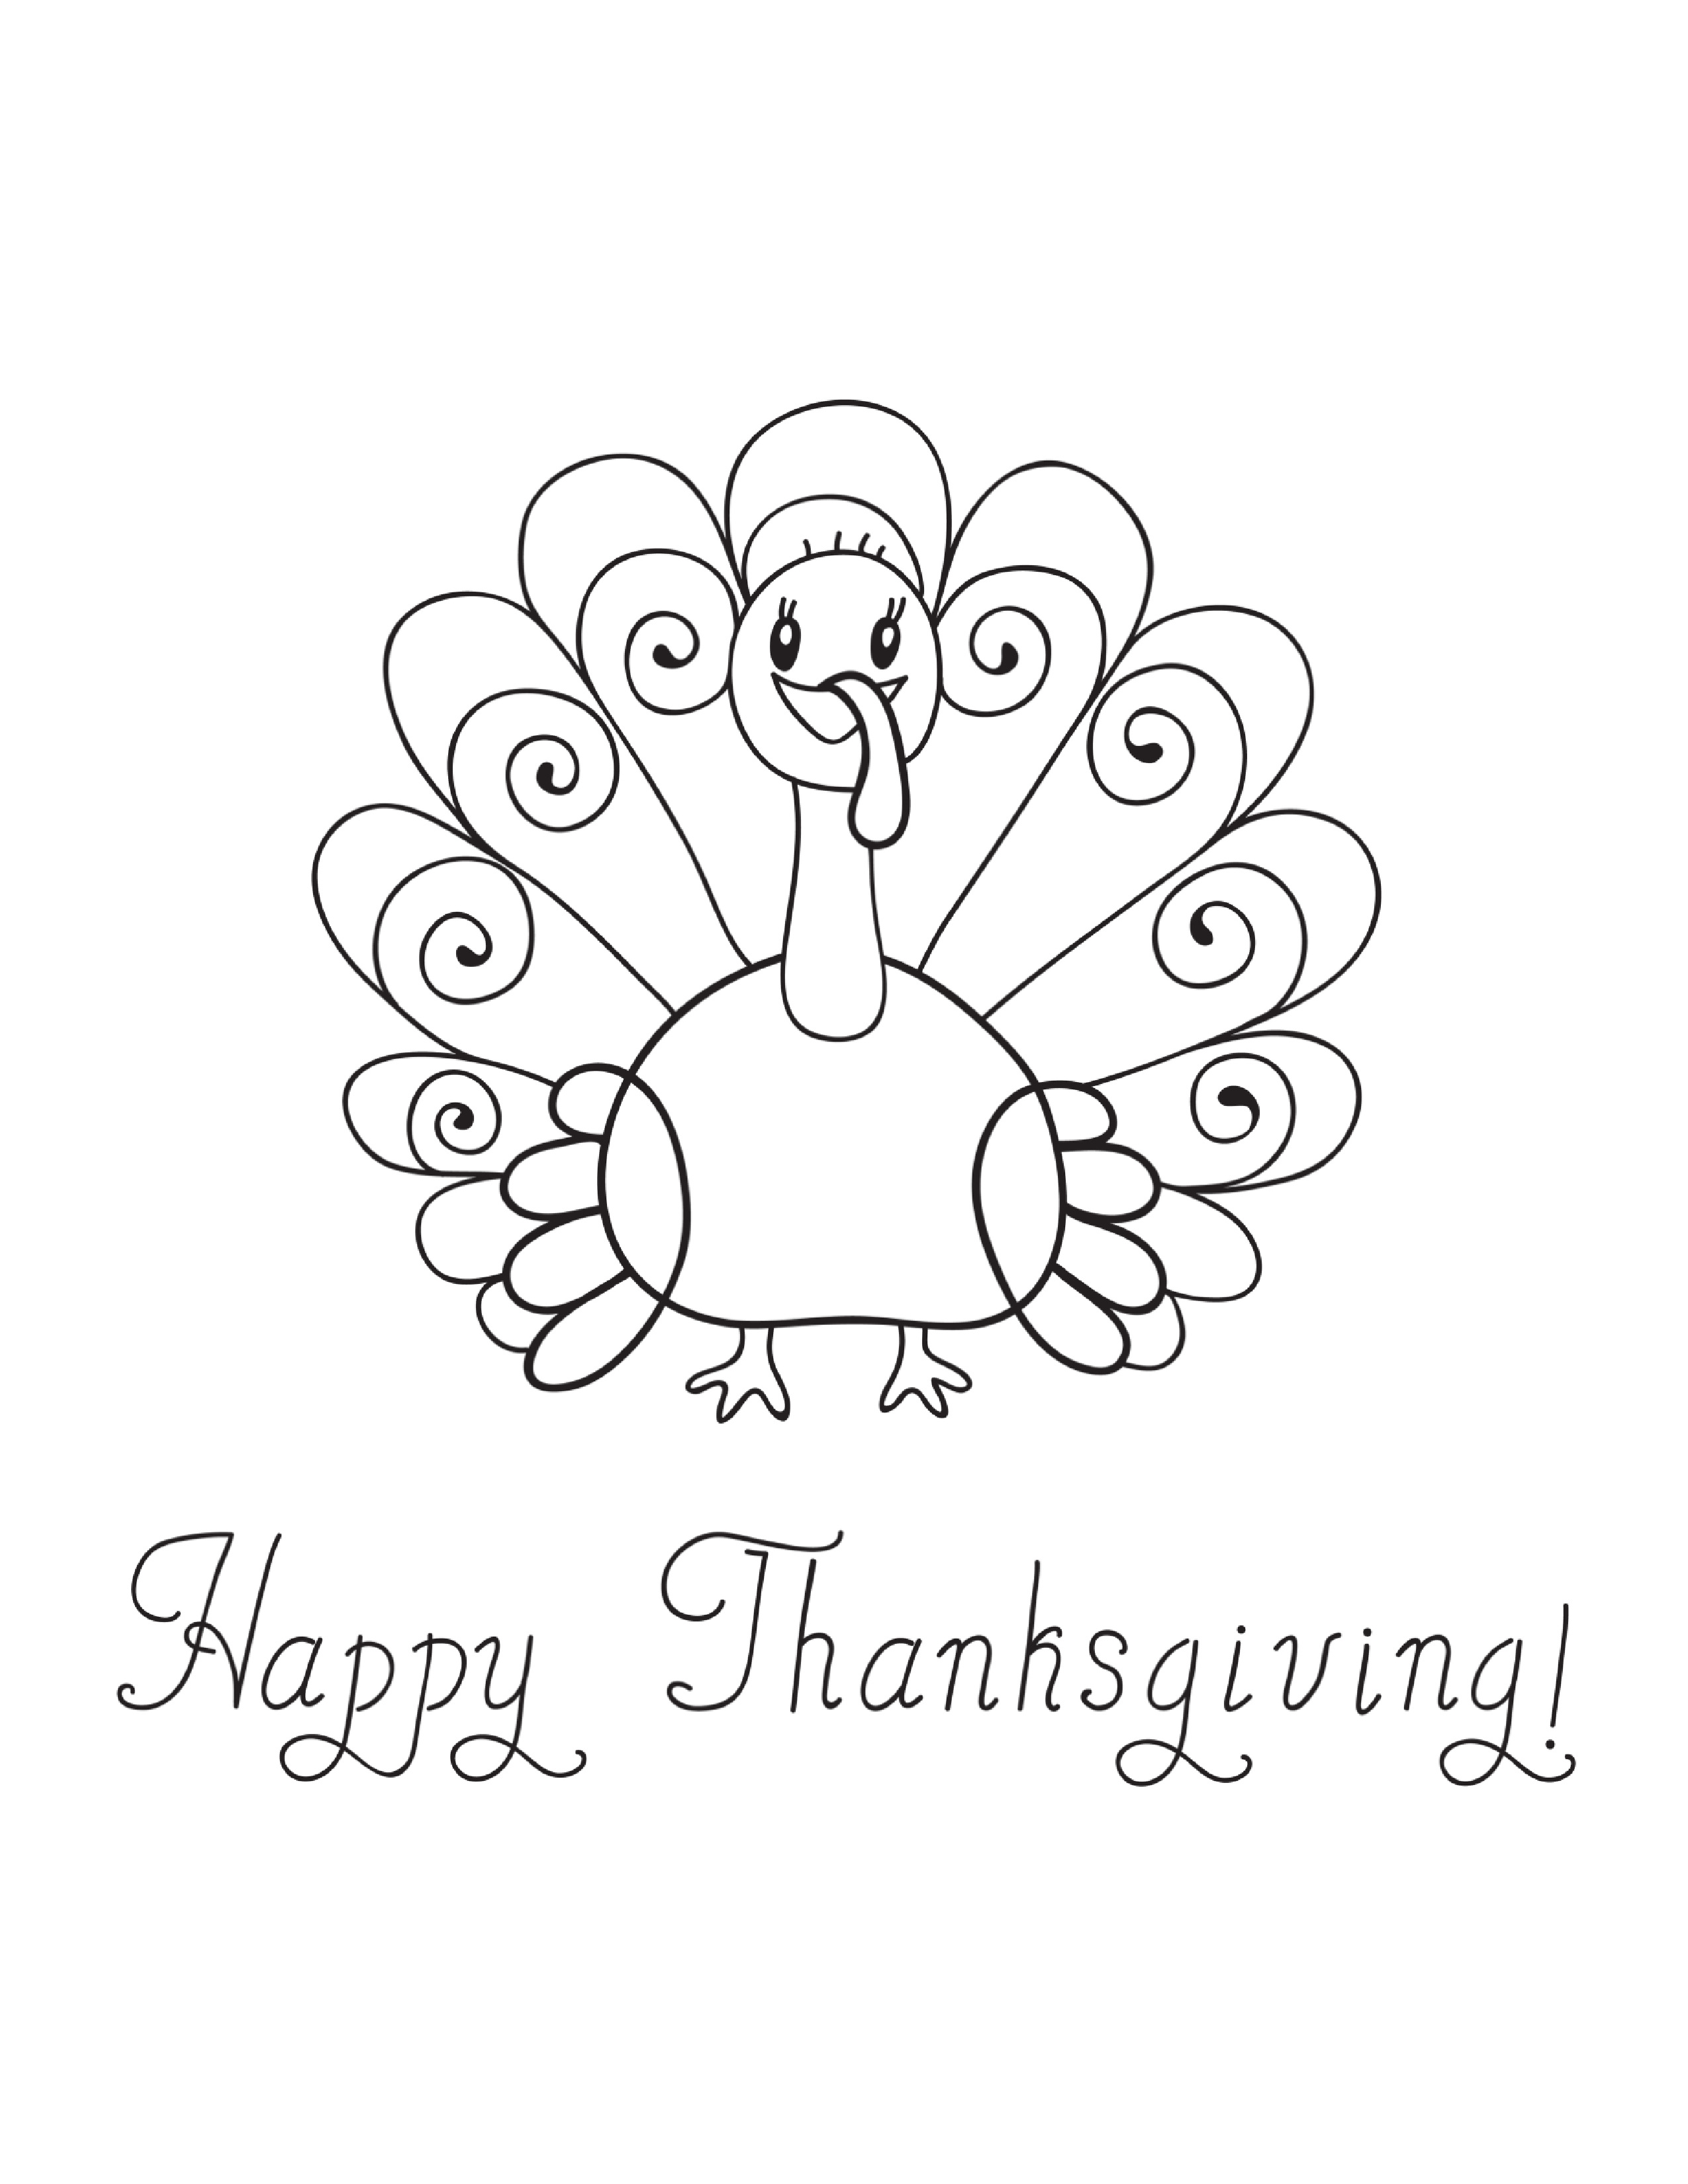 images-of-thanksgiving-turkeys-to-color-coloring-town-cakrawalanews